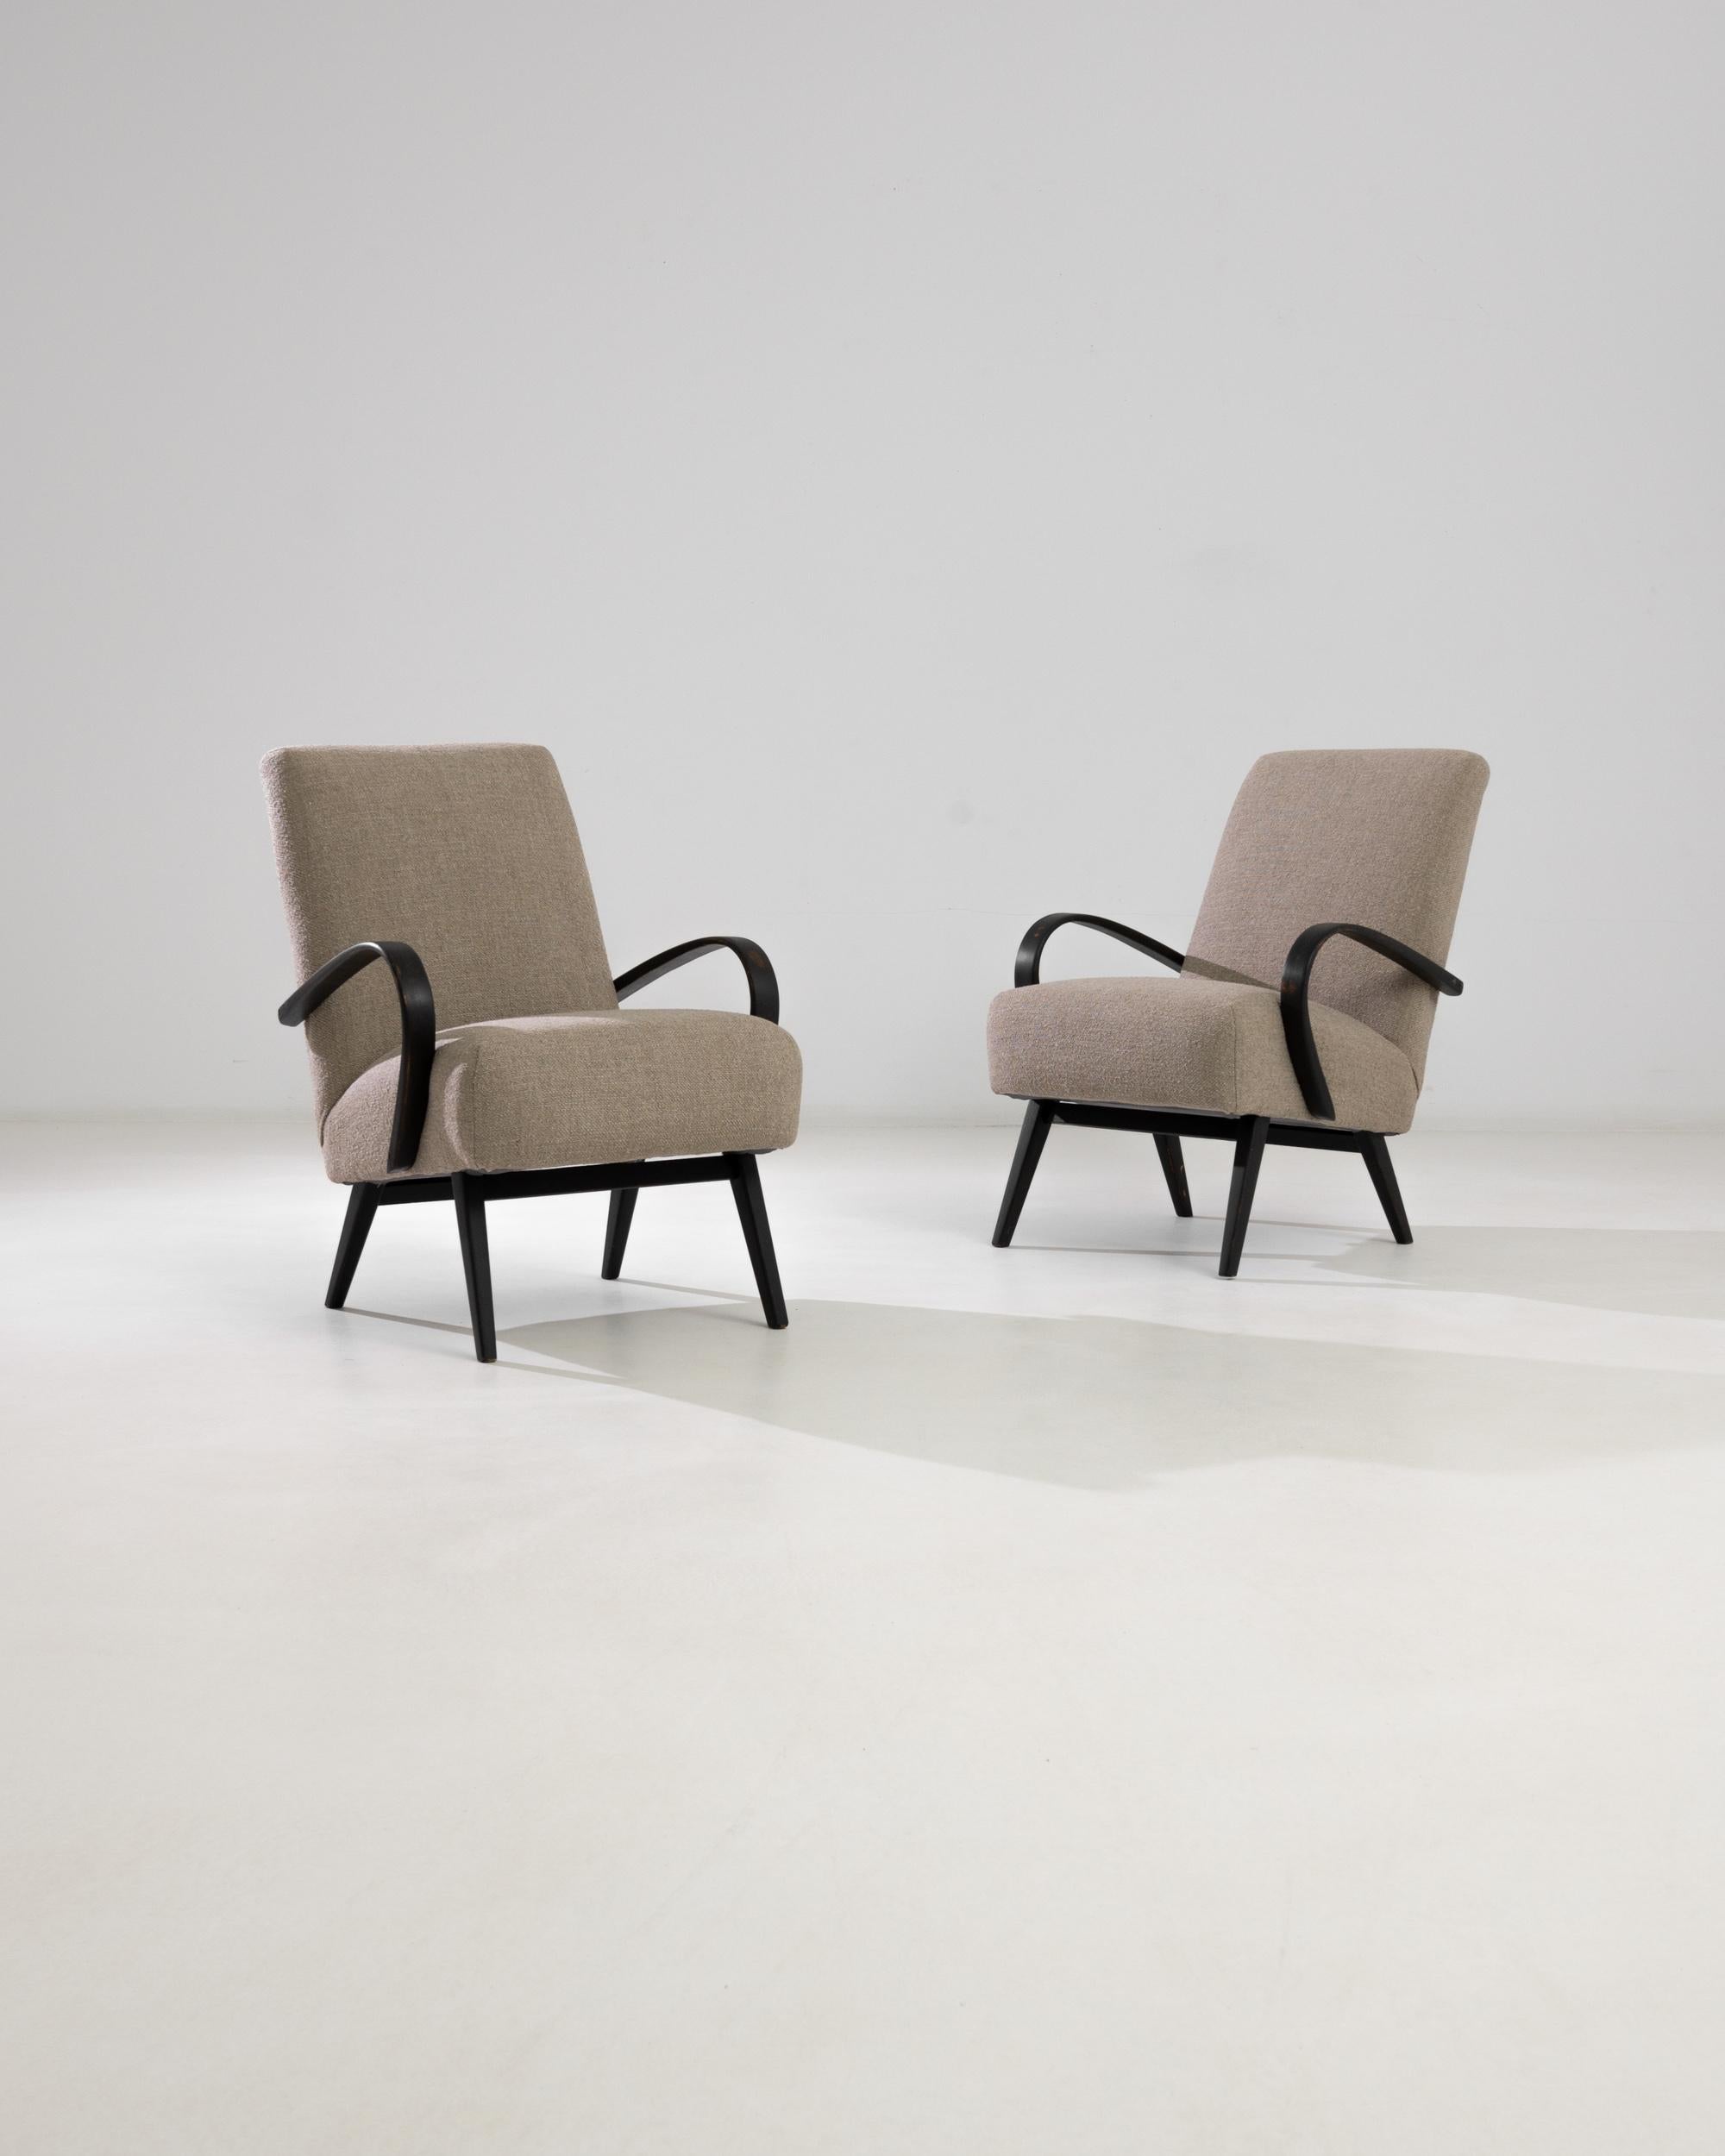 This pair of Mid-Century Modern gems was designed by J. Halabala in Czechia. The iconic frame with bentwood armrests and asymmetrical hay legs punctuate soft geometry of the upholstered backrests and seats. Executed in a rare dark beige tone, they